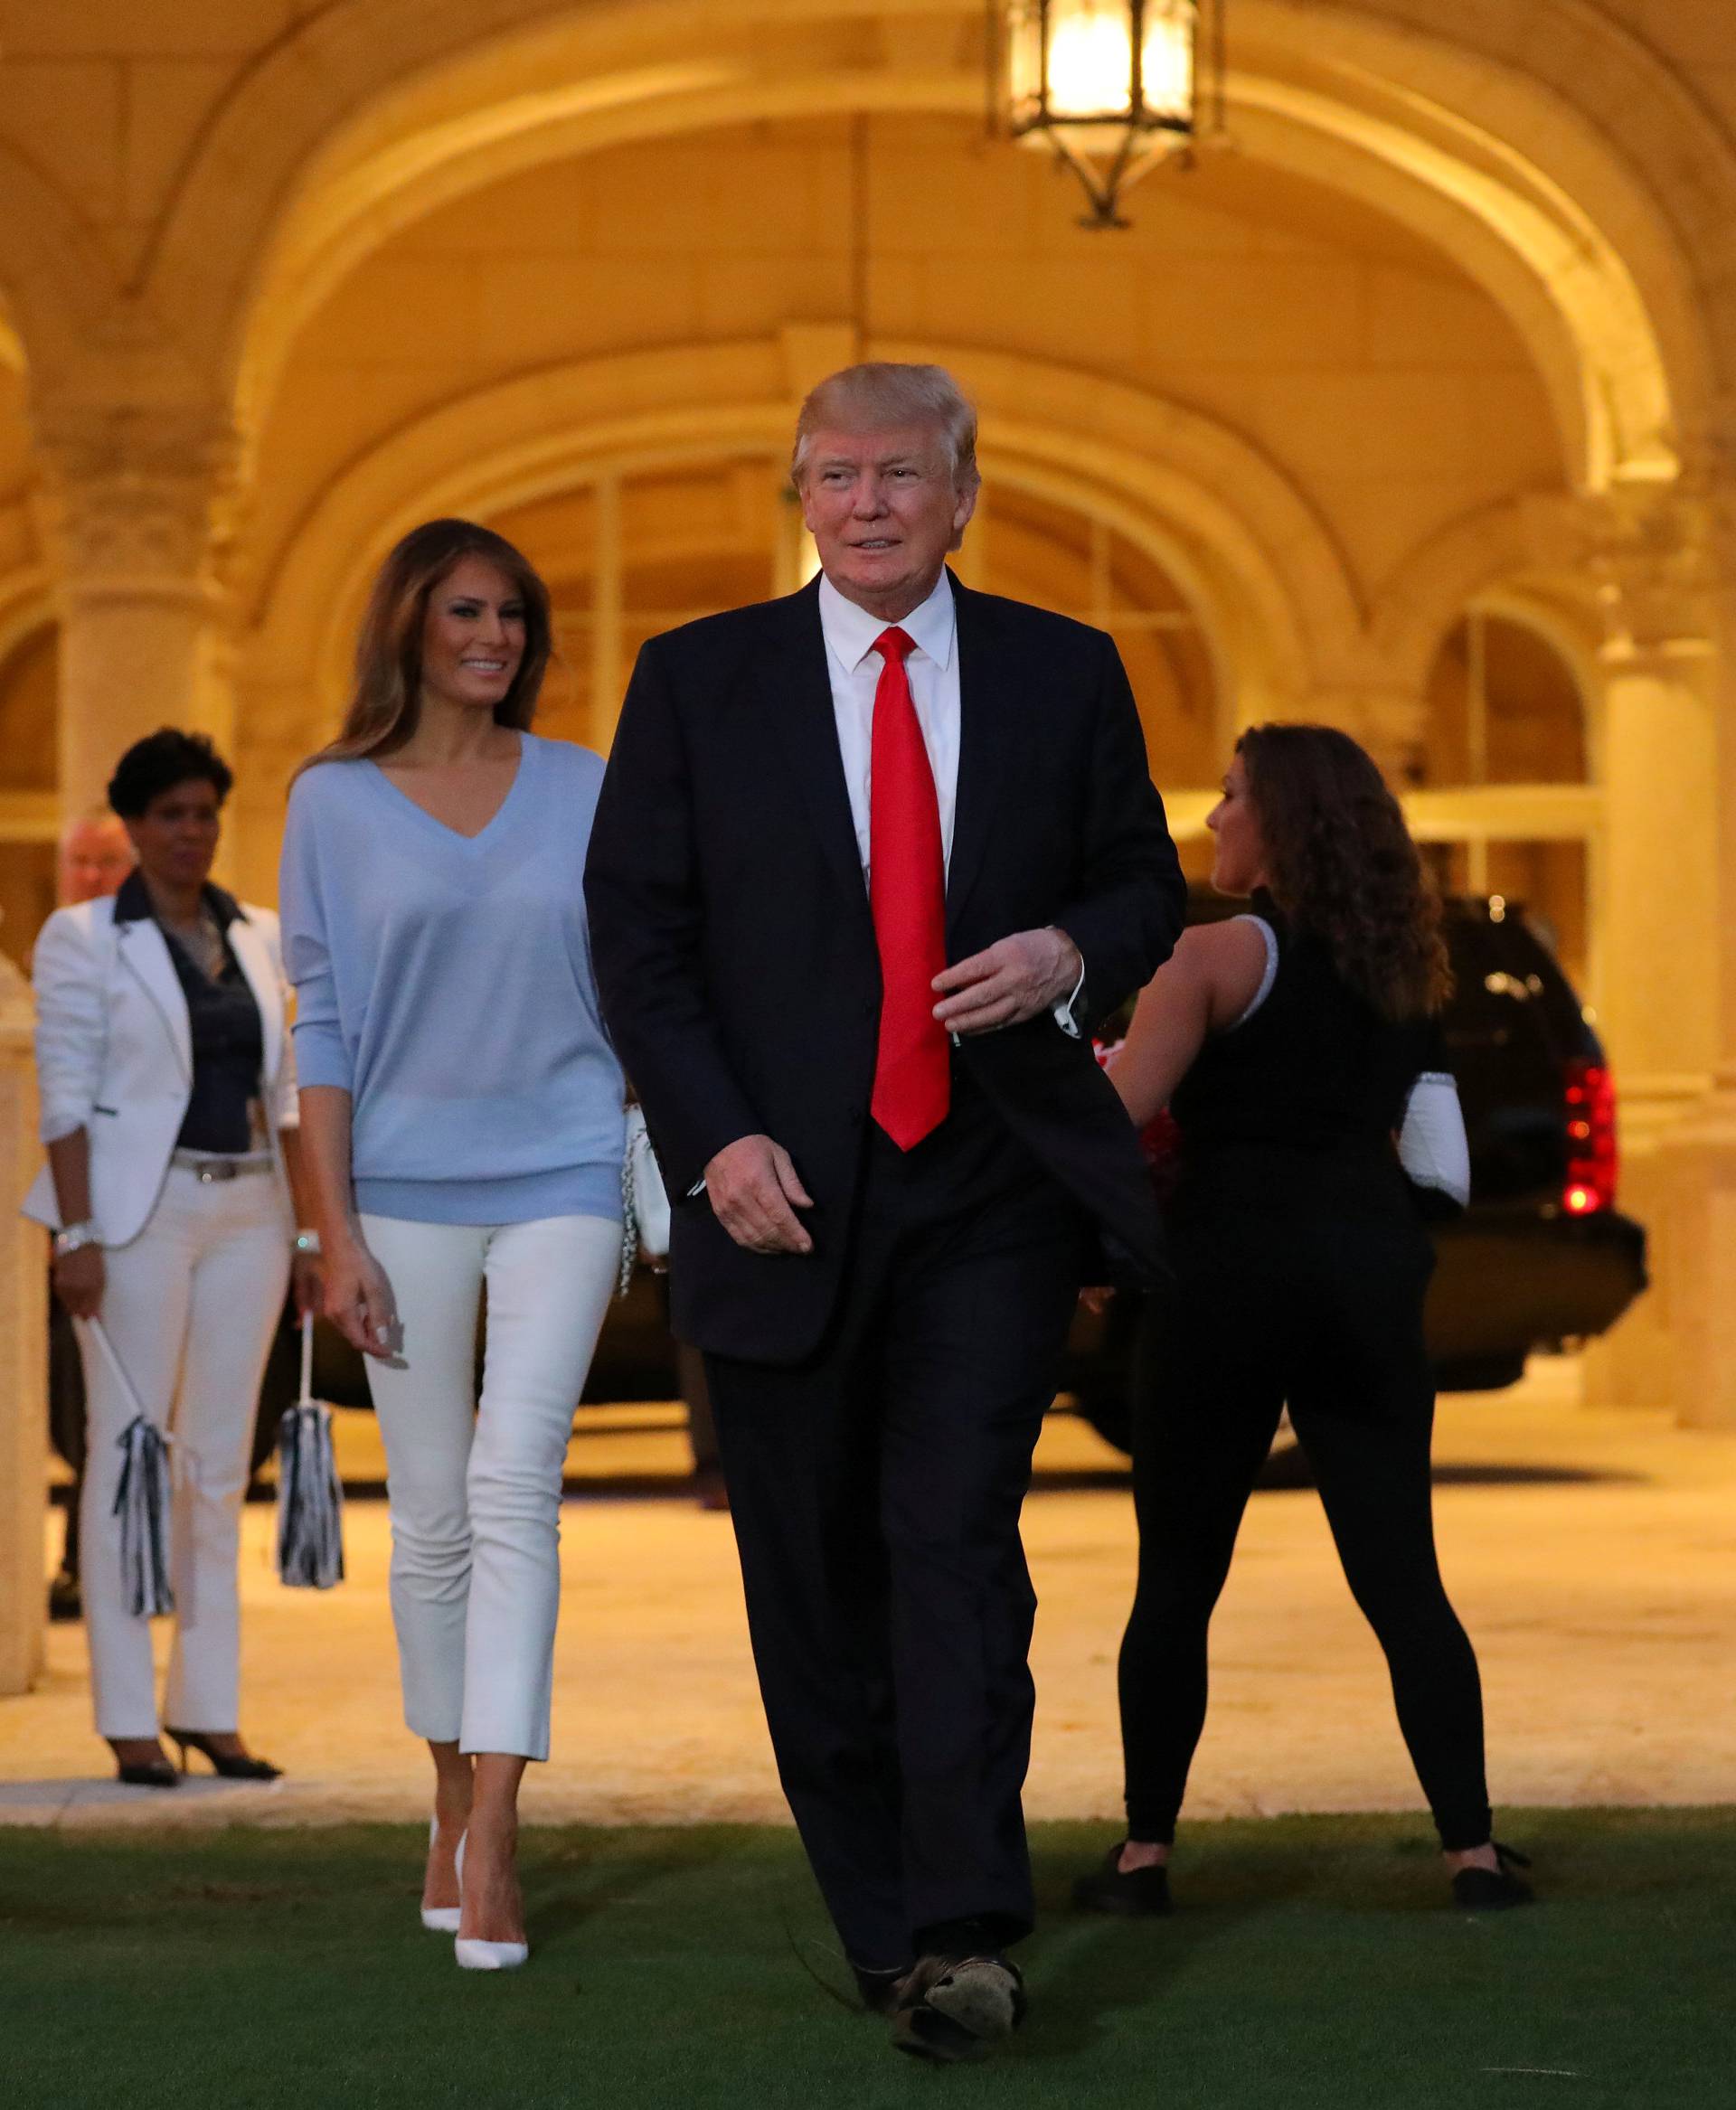 U.S. President Donald Trump and First Lady Melania Trump greet a marching band as they arrive at Trump International Golf club to watch the Super Bowl LI between New England Patriots and Atlanta Falcons in West Palm Beach, Florida, U.S.